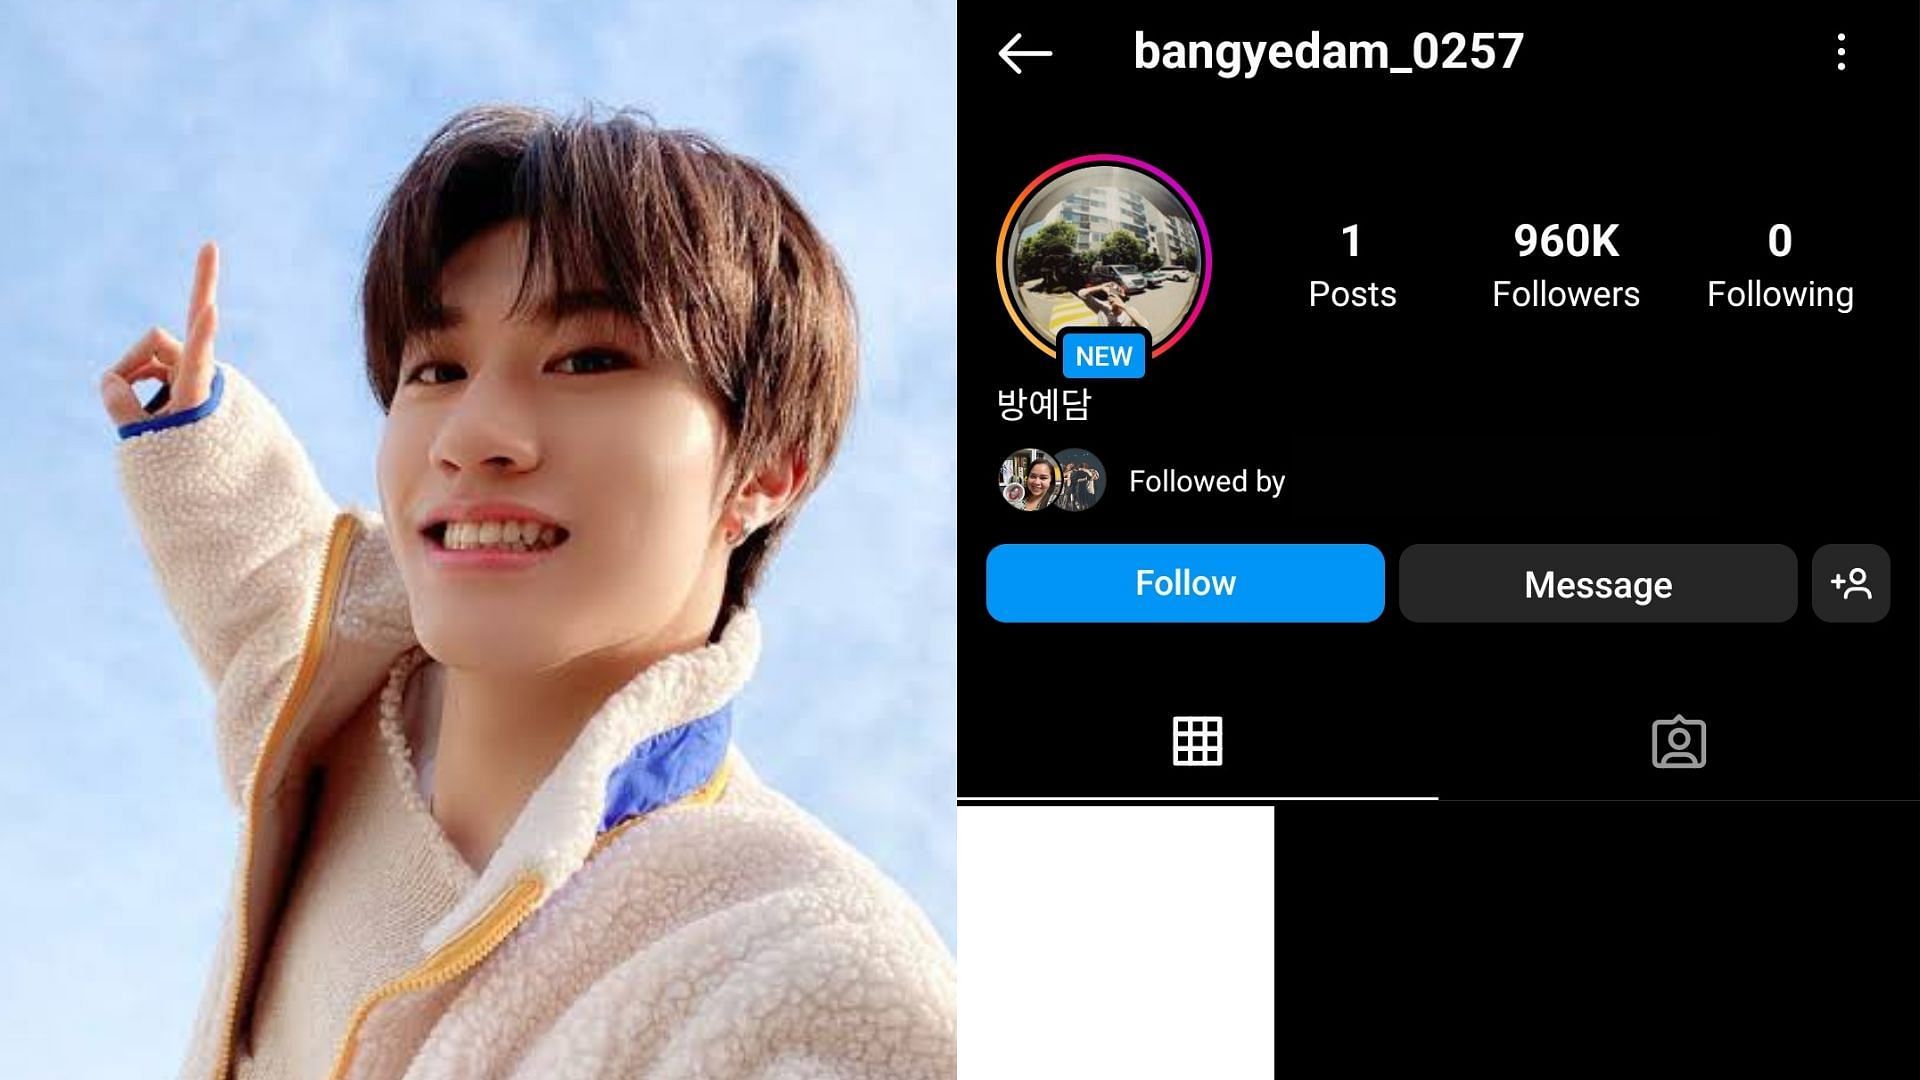 Bang Yedam opens personal Instagram account (Images via Twitter/philconcerts and Instagram/bangyedam_0257)